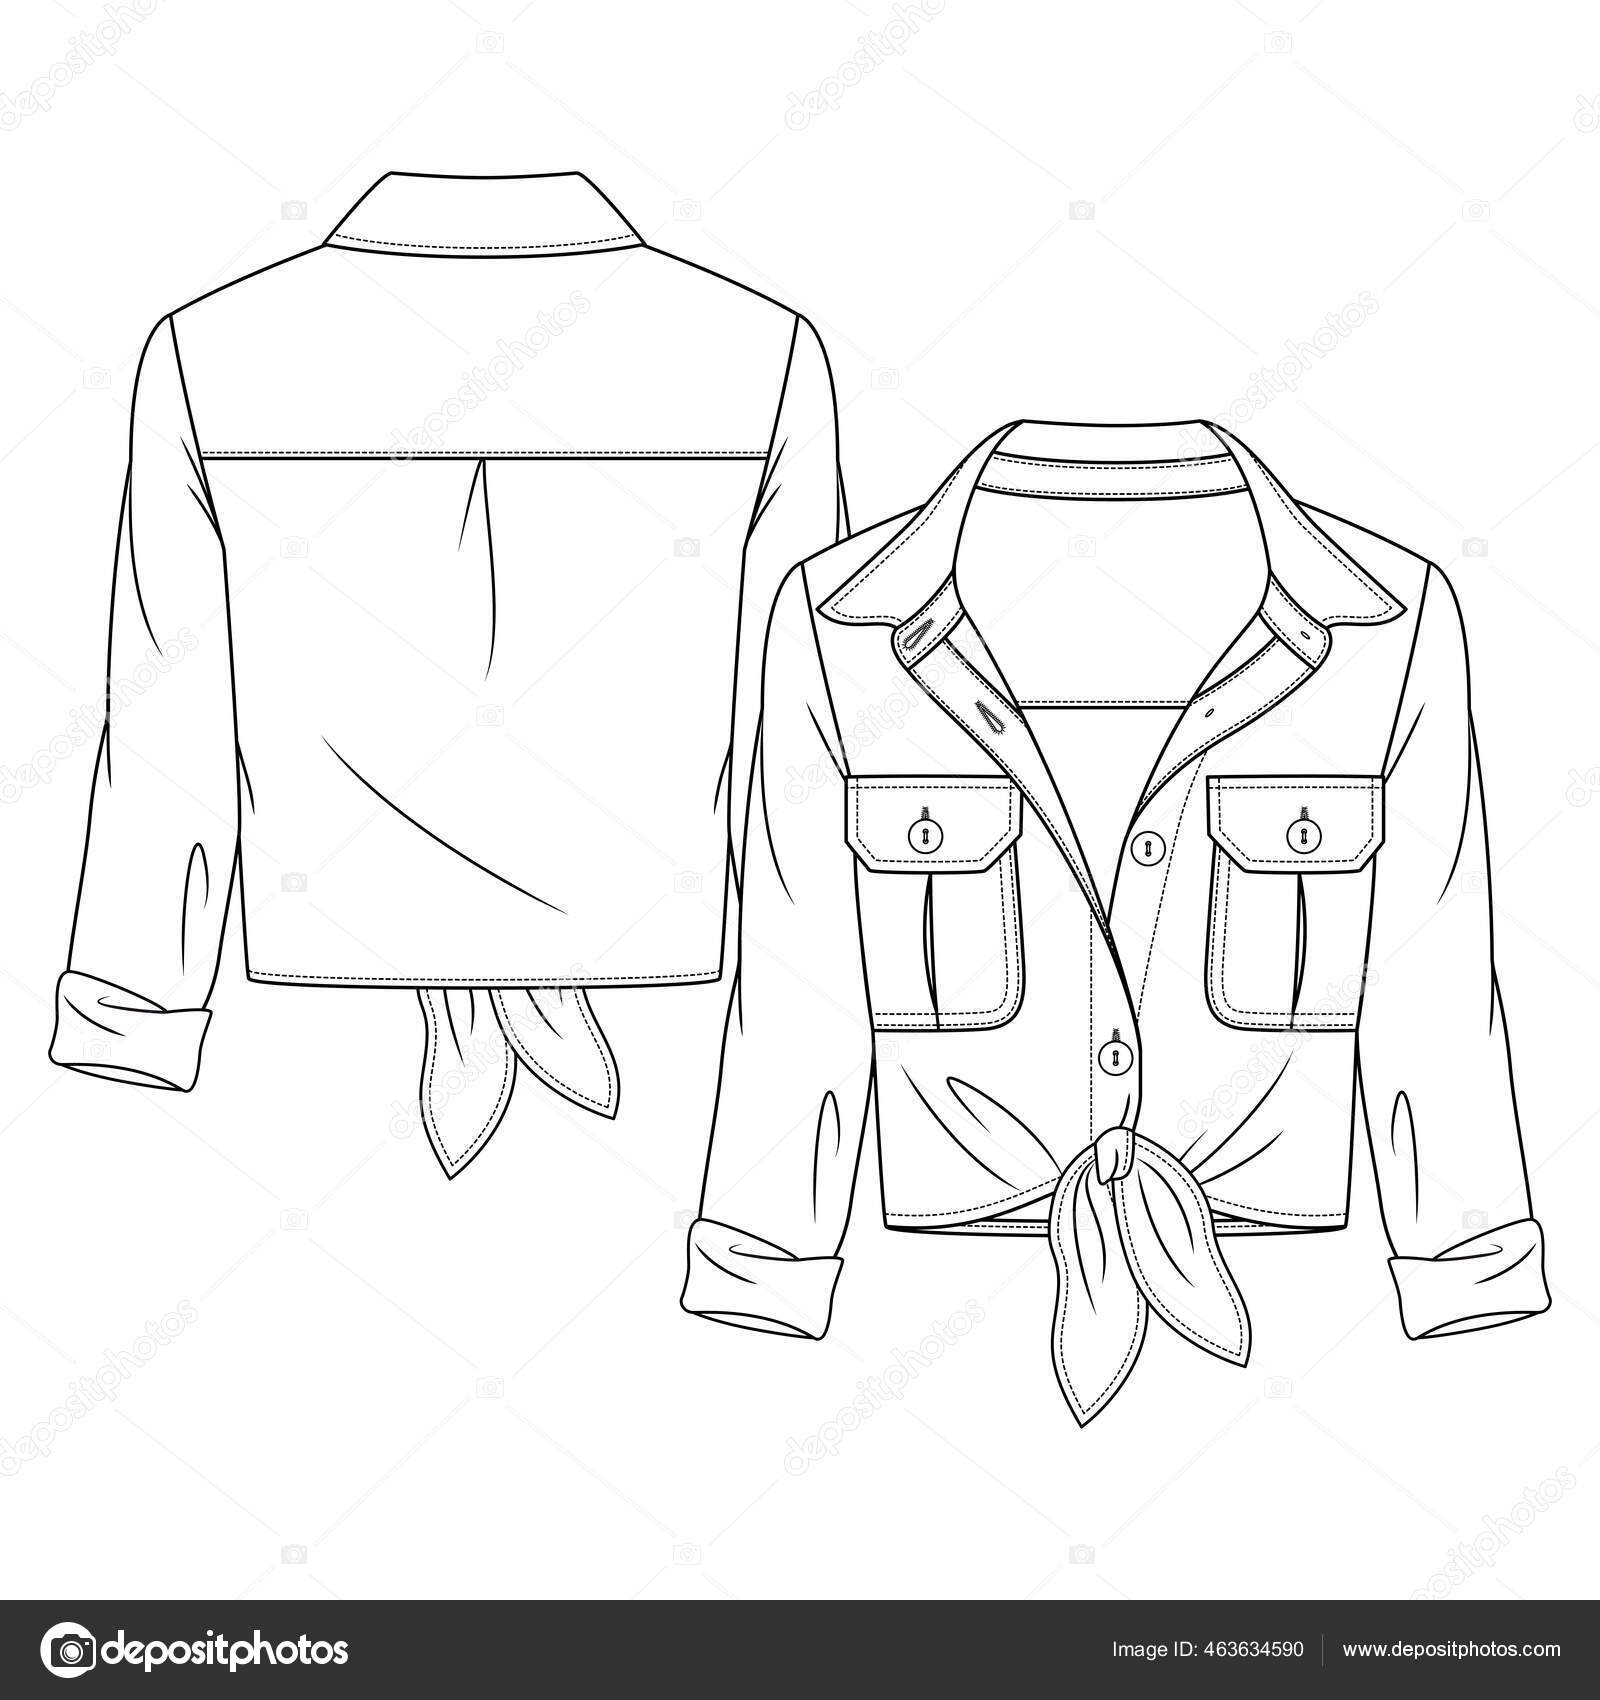 Shirt Dress For Women/ Illustrator Flat Sketch Template/ Front And Bac